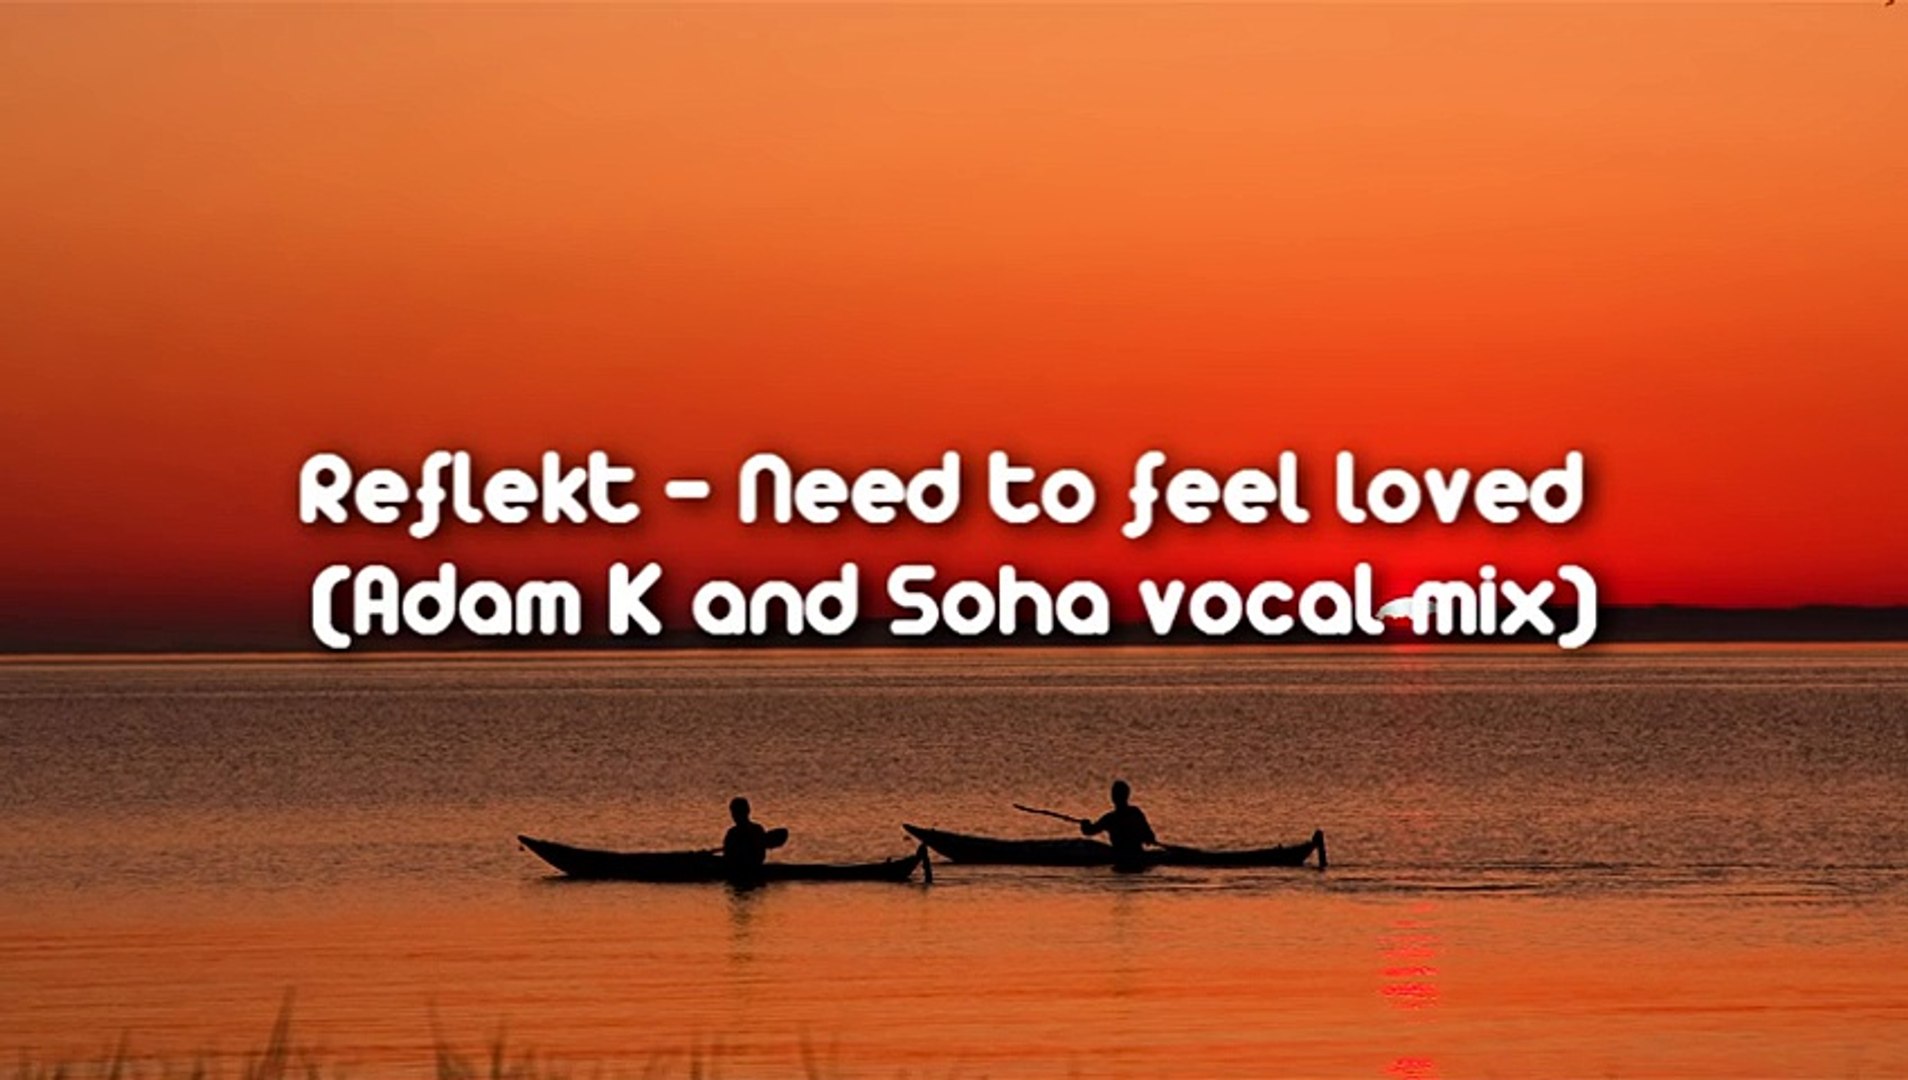 Adam k Soha need to feel. Need to feel Loved Adam k Soha Vocal Mix. Reflekt feat Delline Bass - need to feel Loved (Adam k & Soho Vocal Mix). Reflekt need to feel loved